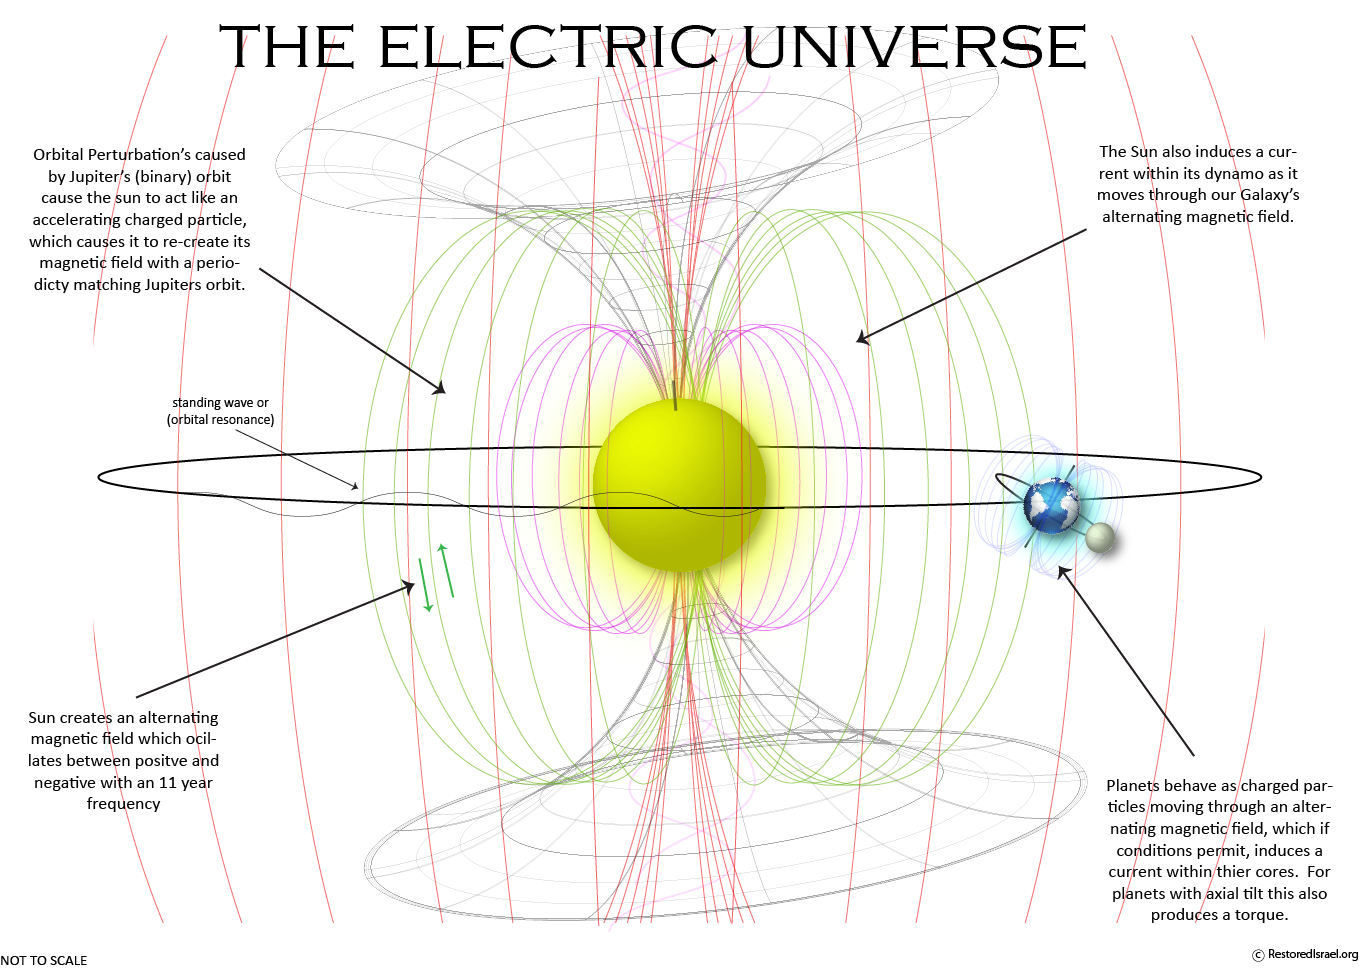 Electromagnetic dynamics within the Solar System and Galaxy.